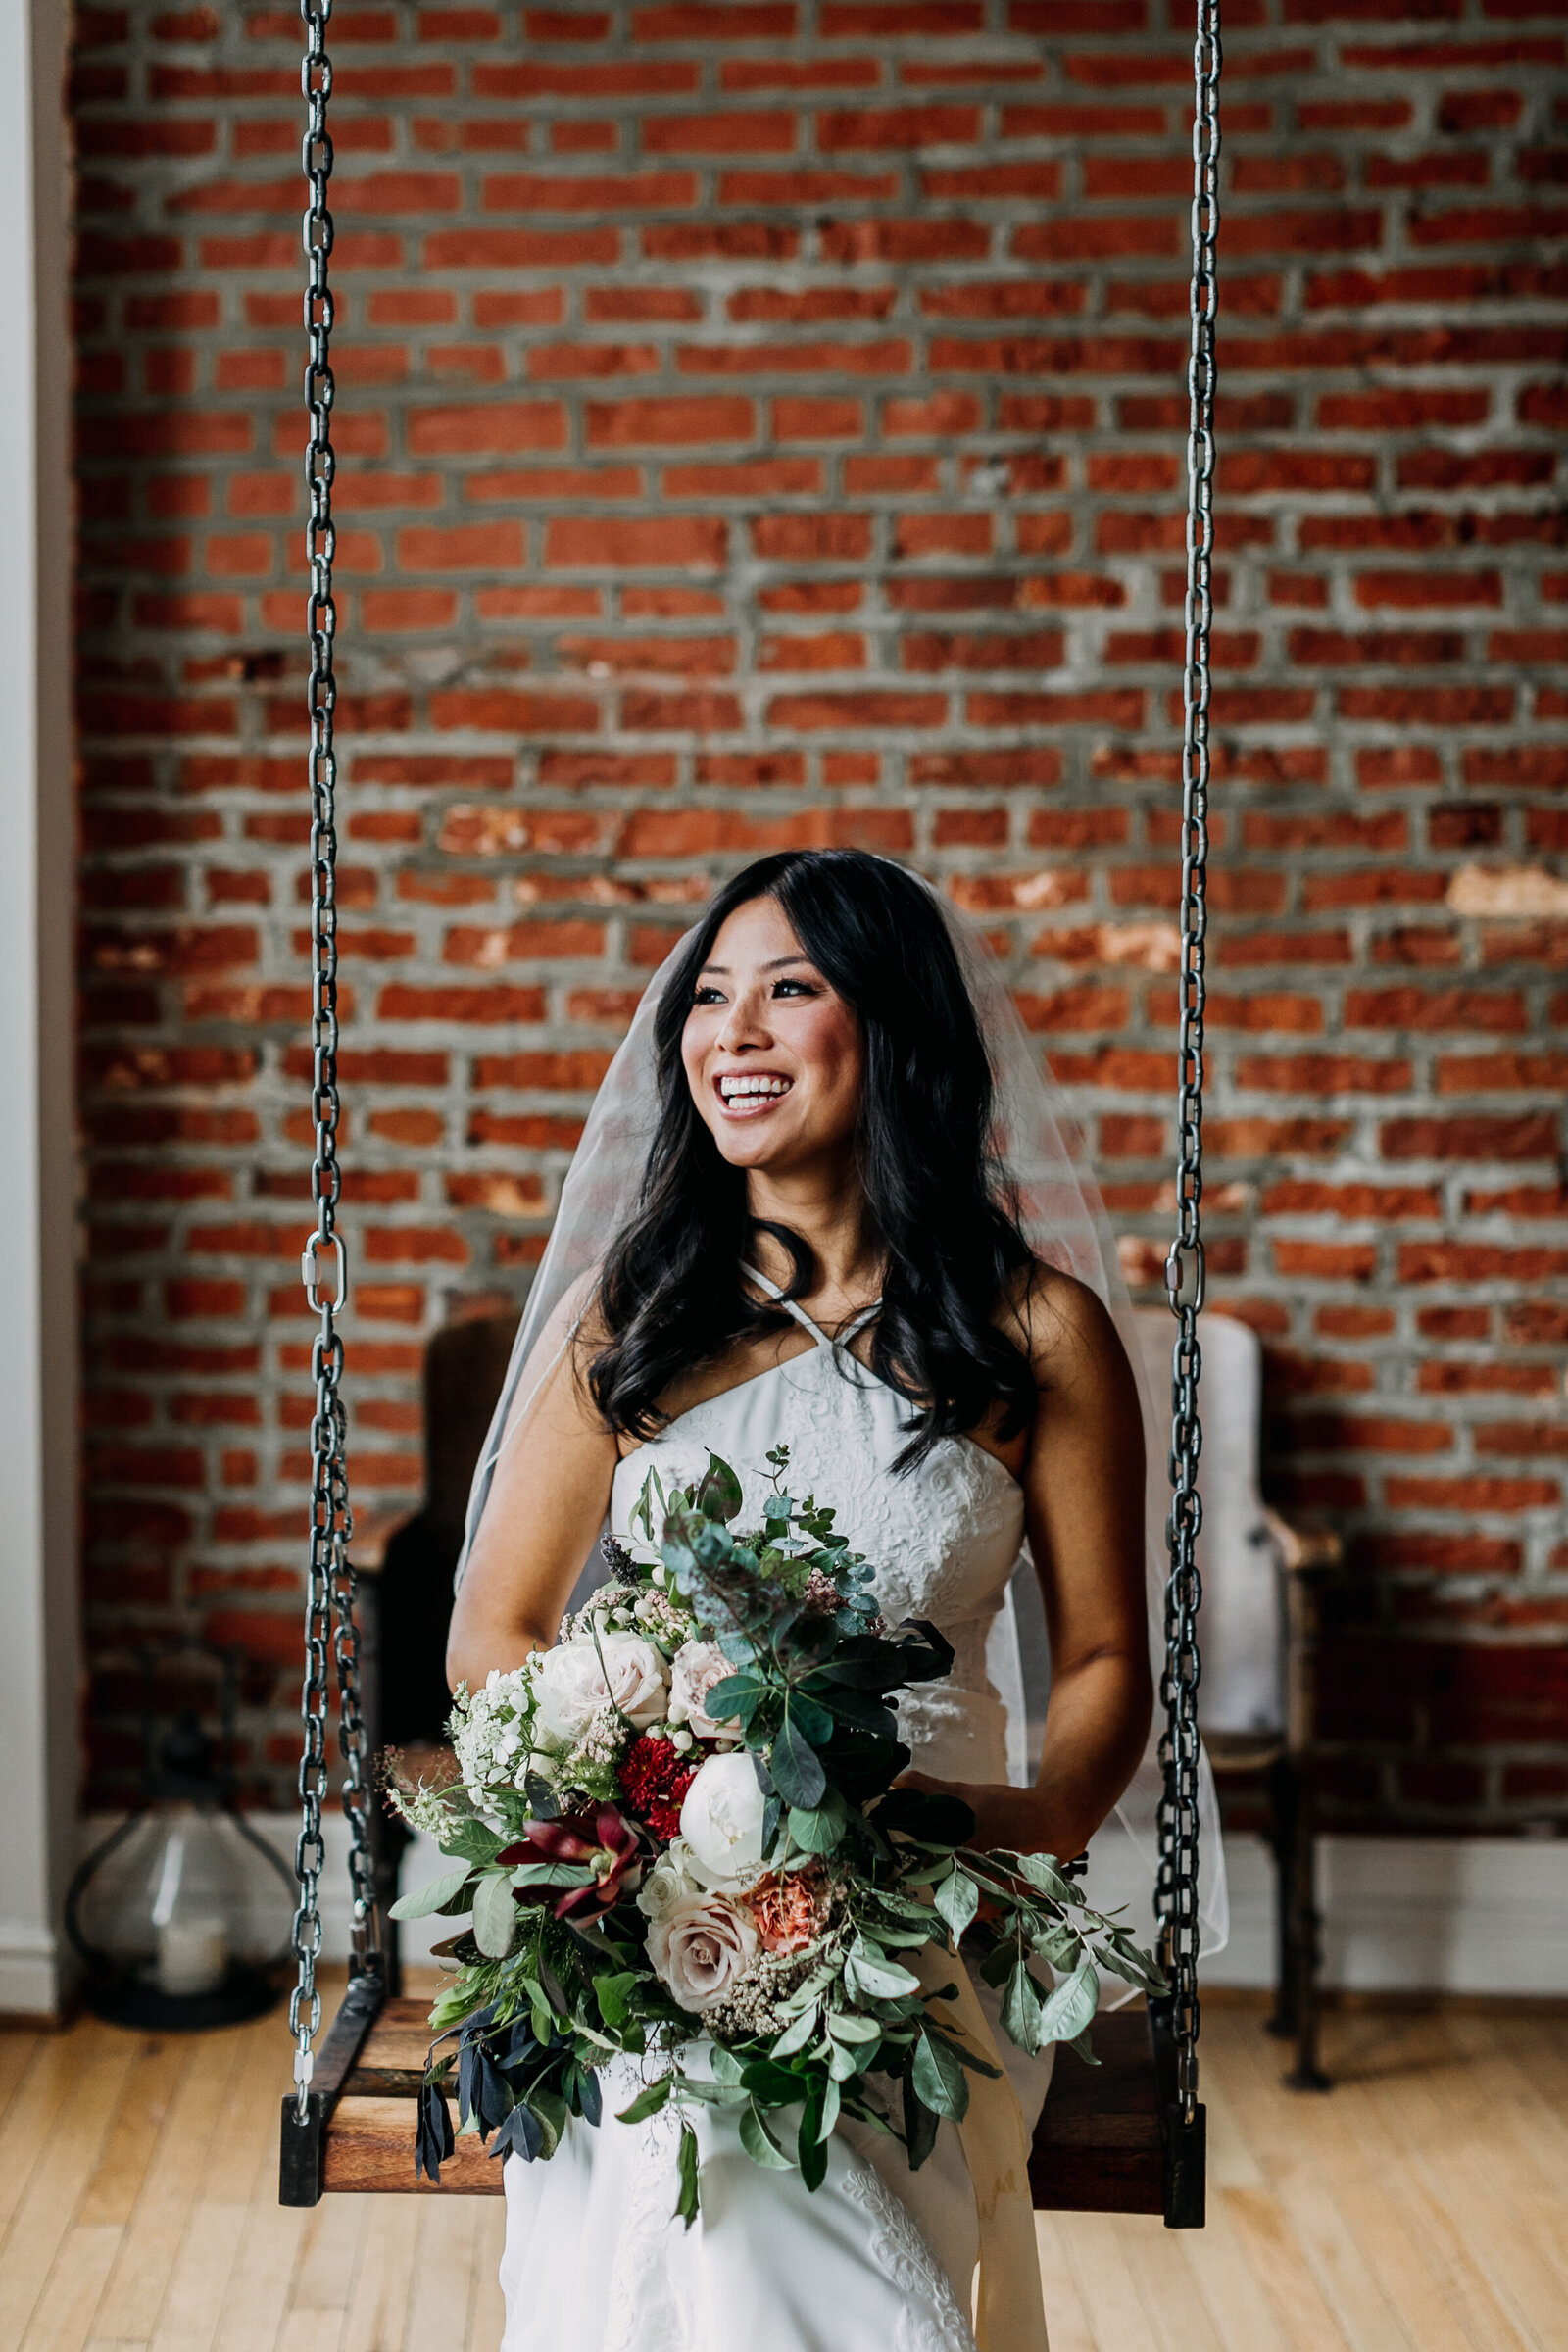 bride with bouquet sitting on swing with brick wall